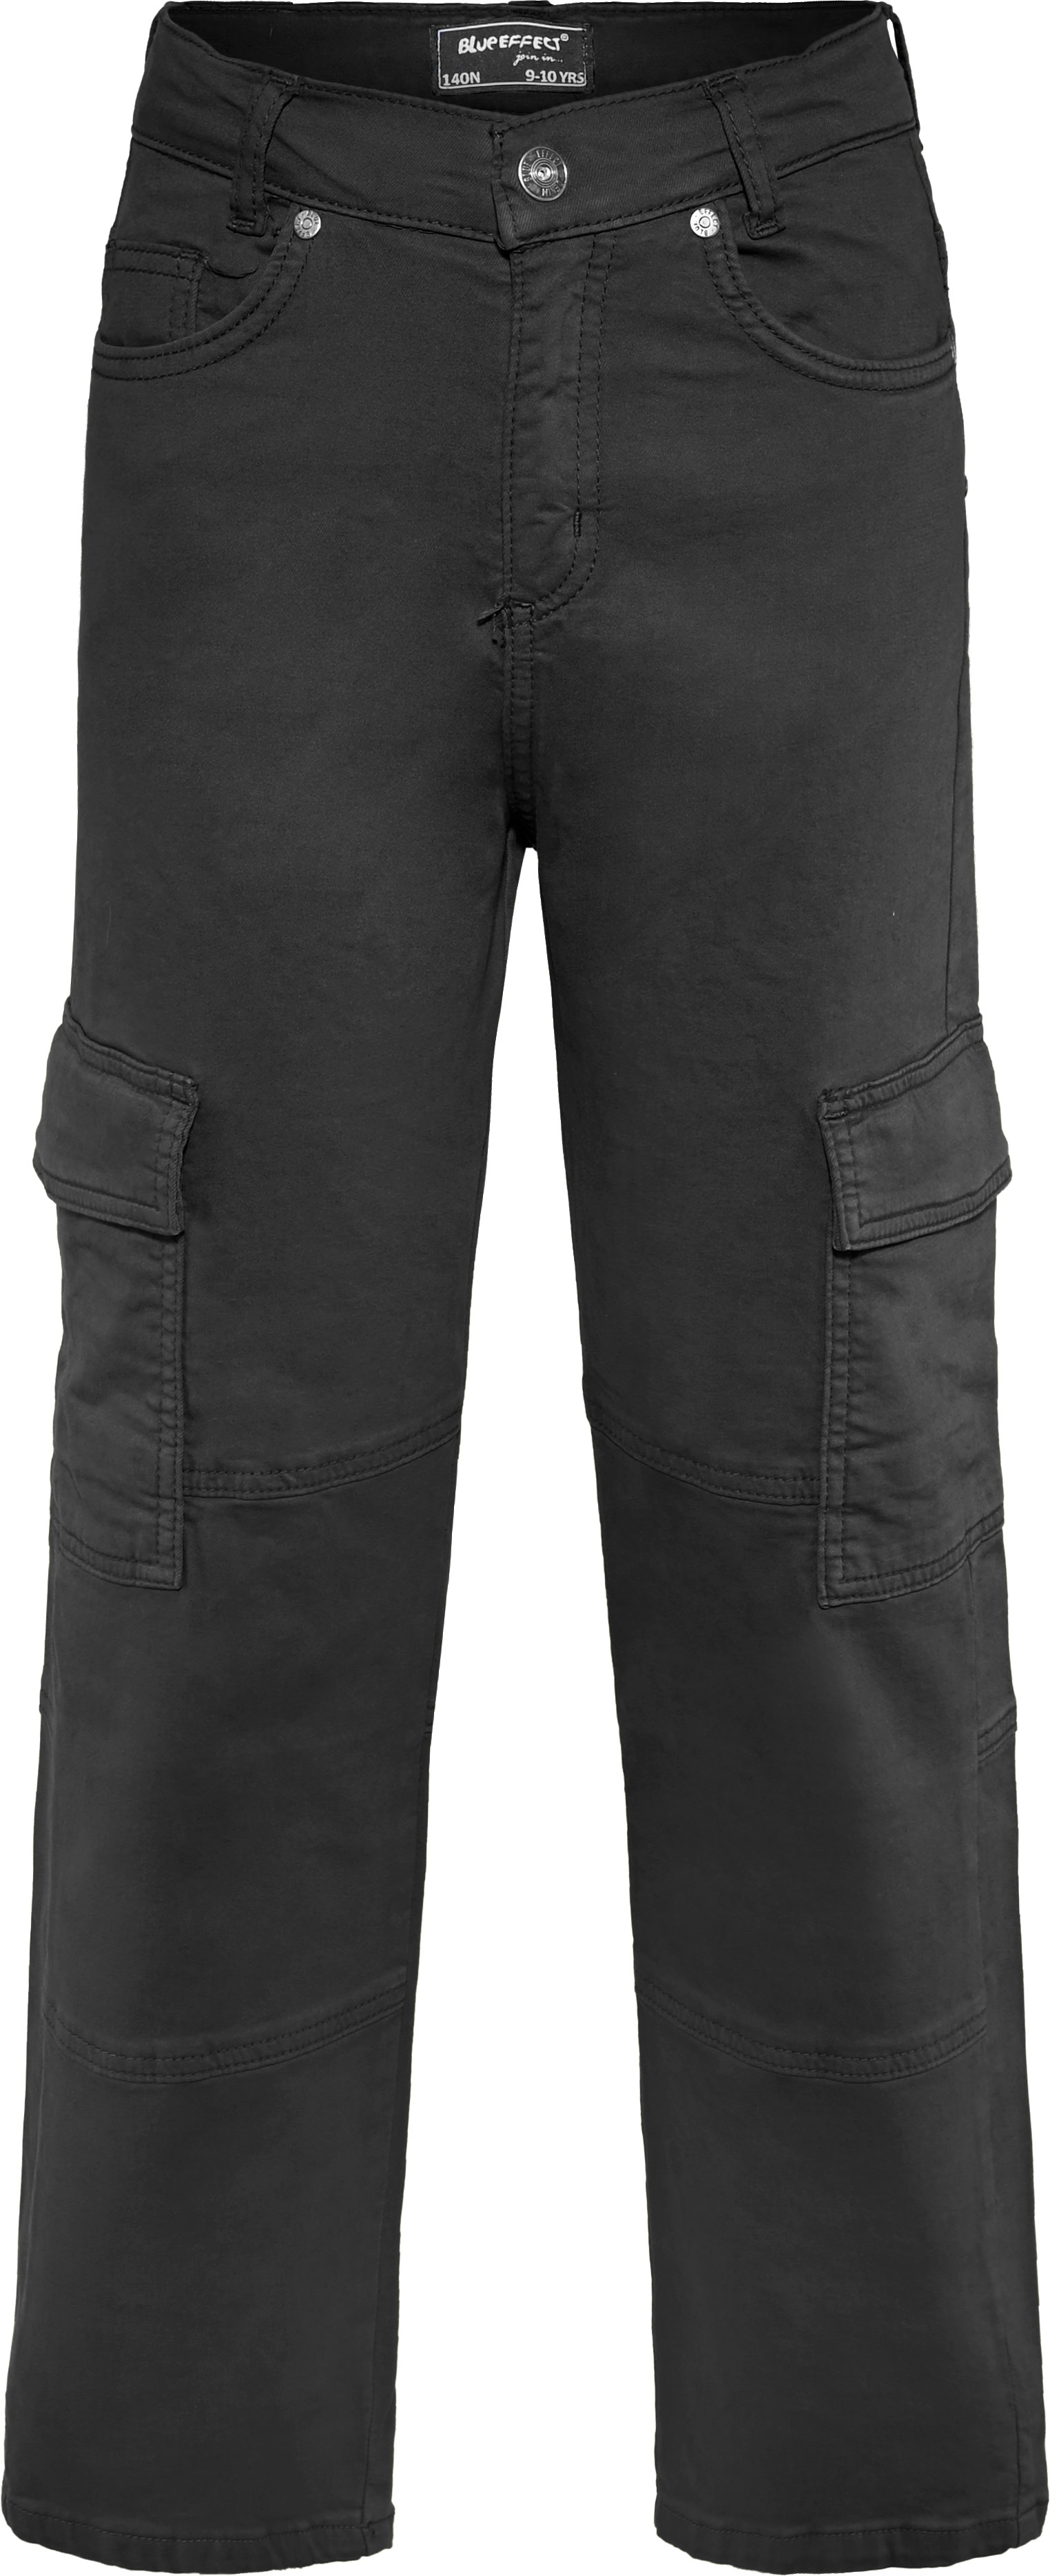 2855-NOS Boys Baggy Cargo Pant available in Slim,Normal